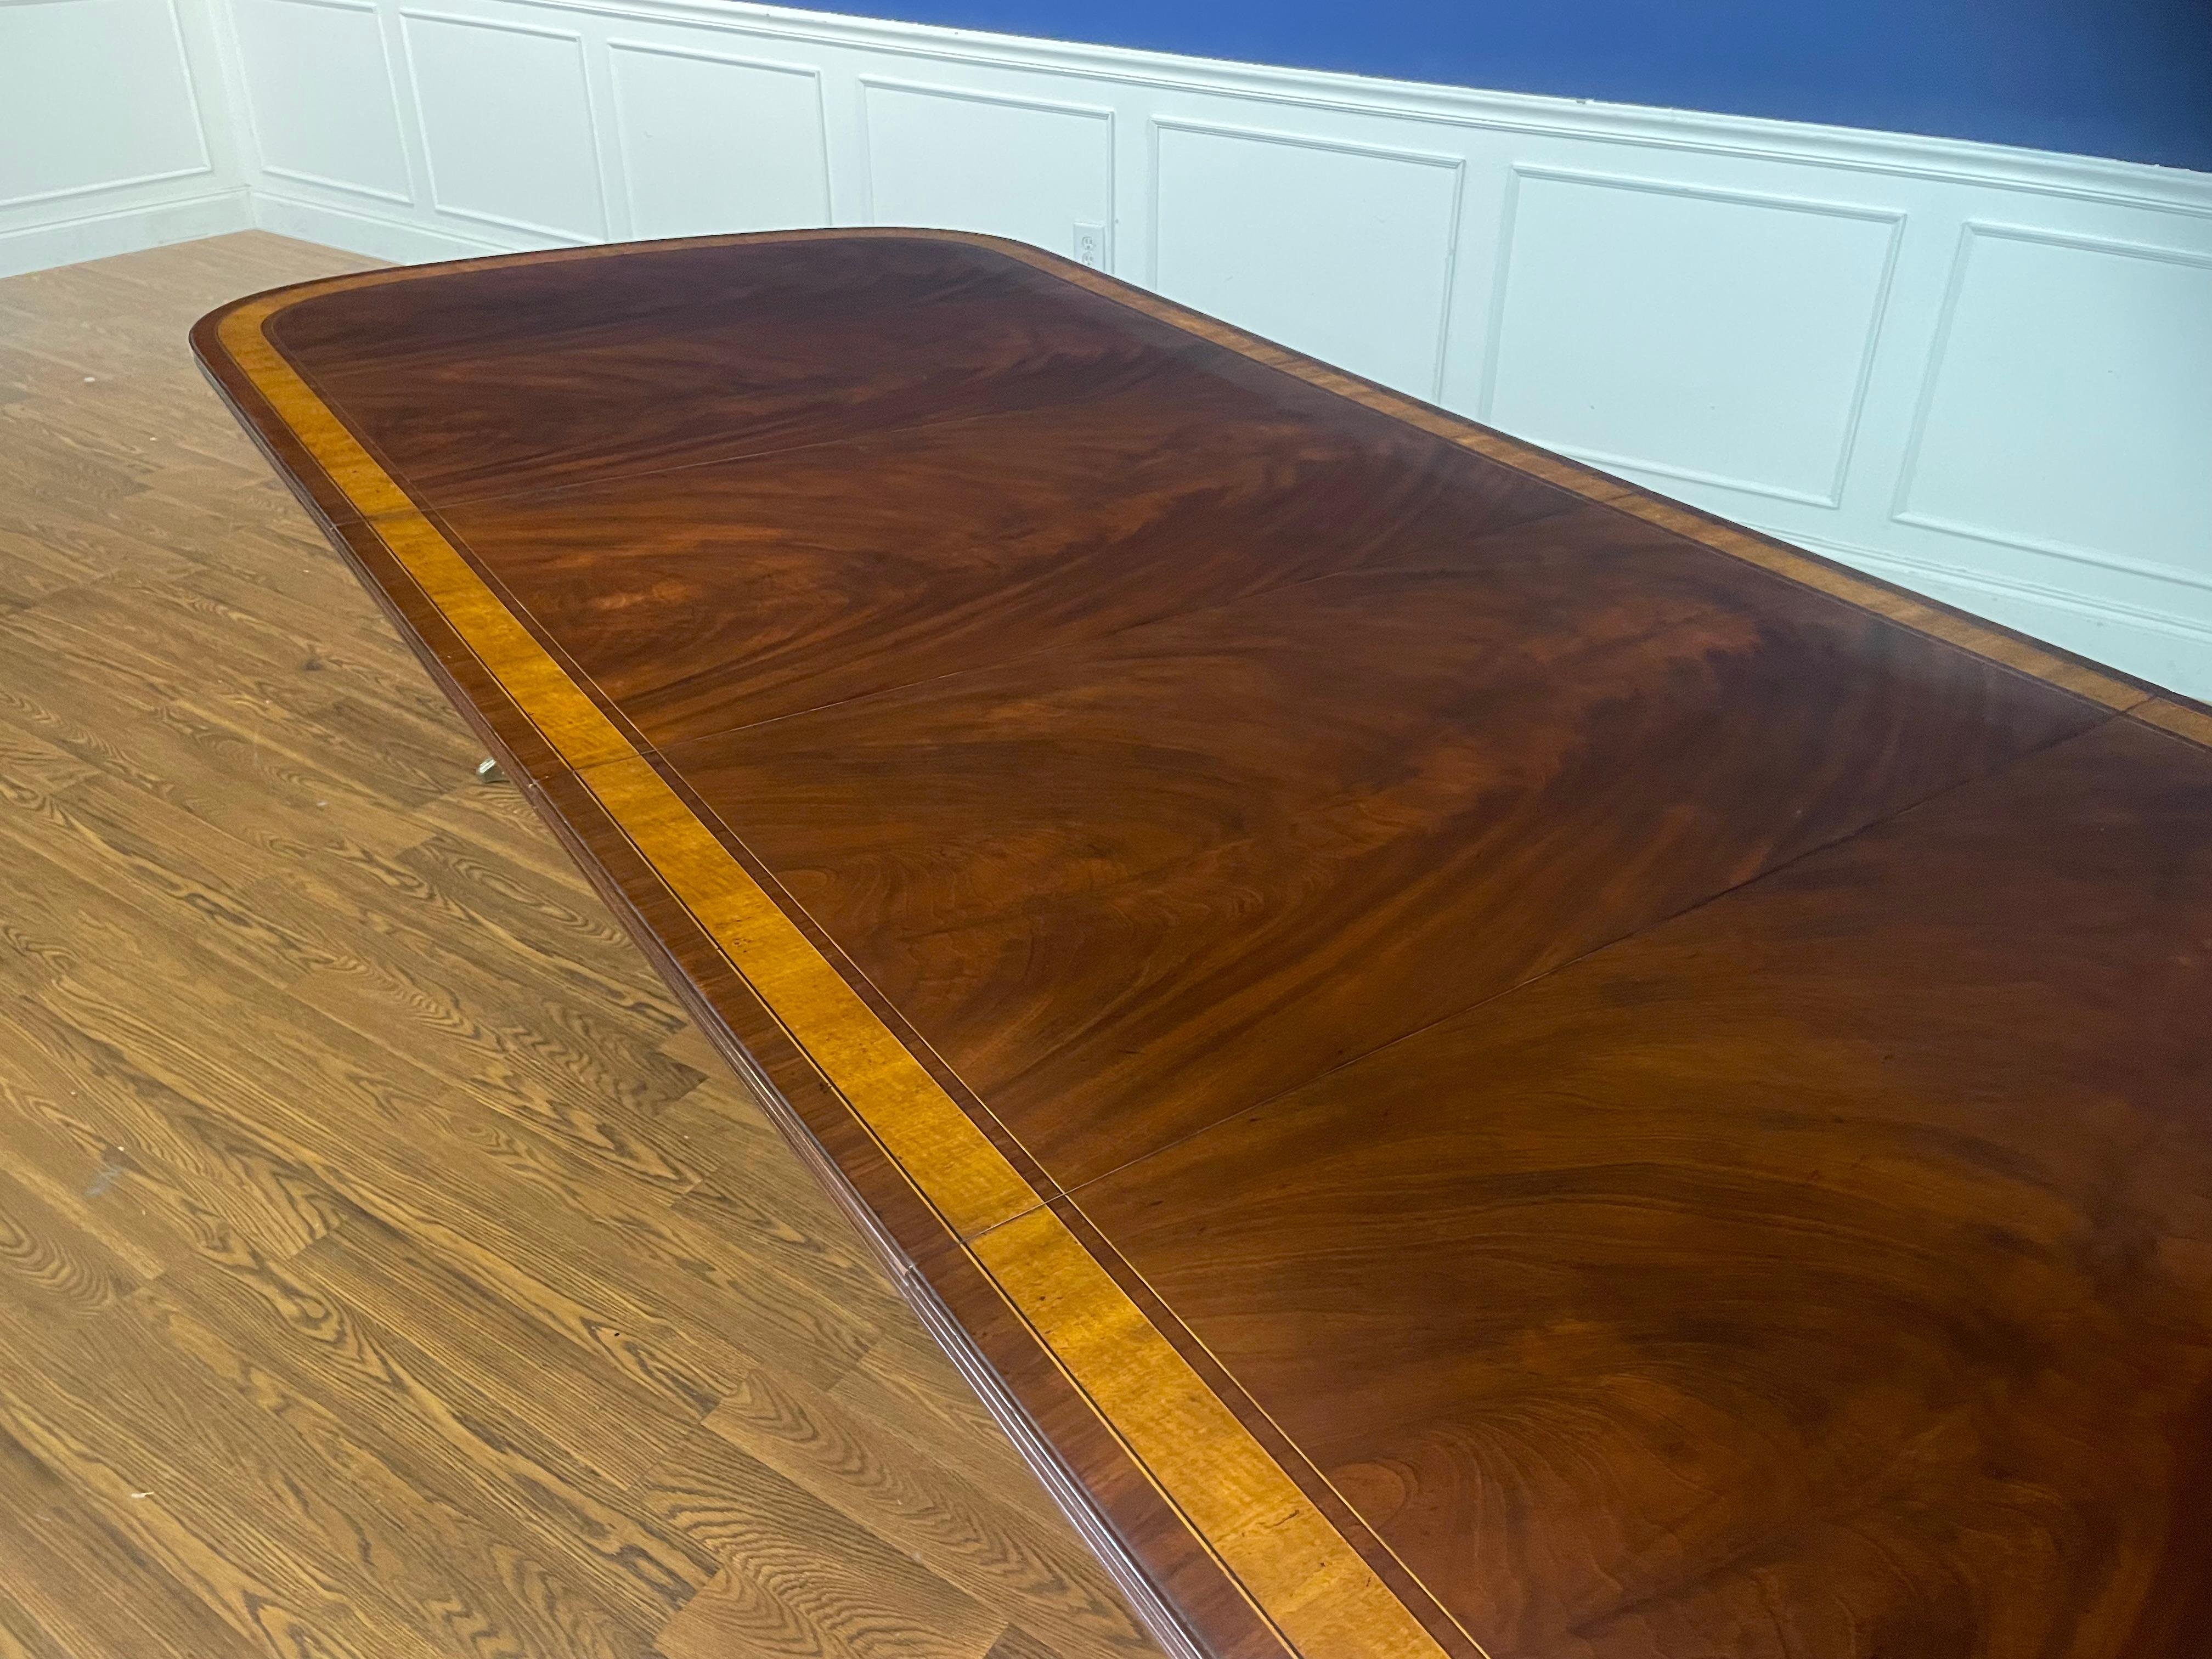 Traditional Mahogany Dining Table by Leighton Hall - Showroom Sample In Good Condition For Sale In Suwanee, GA